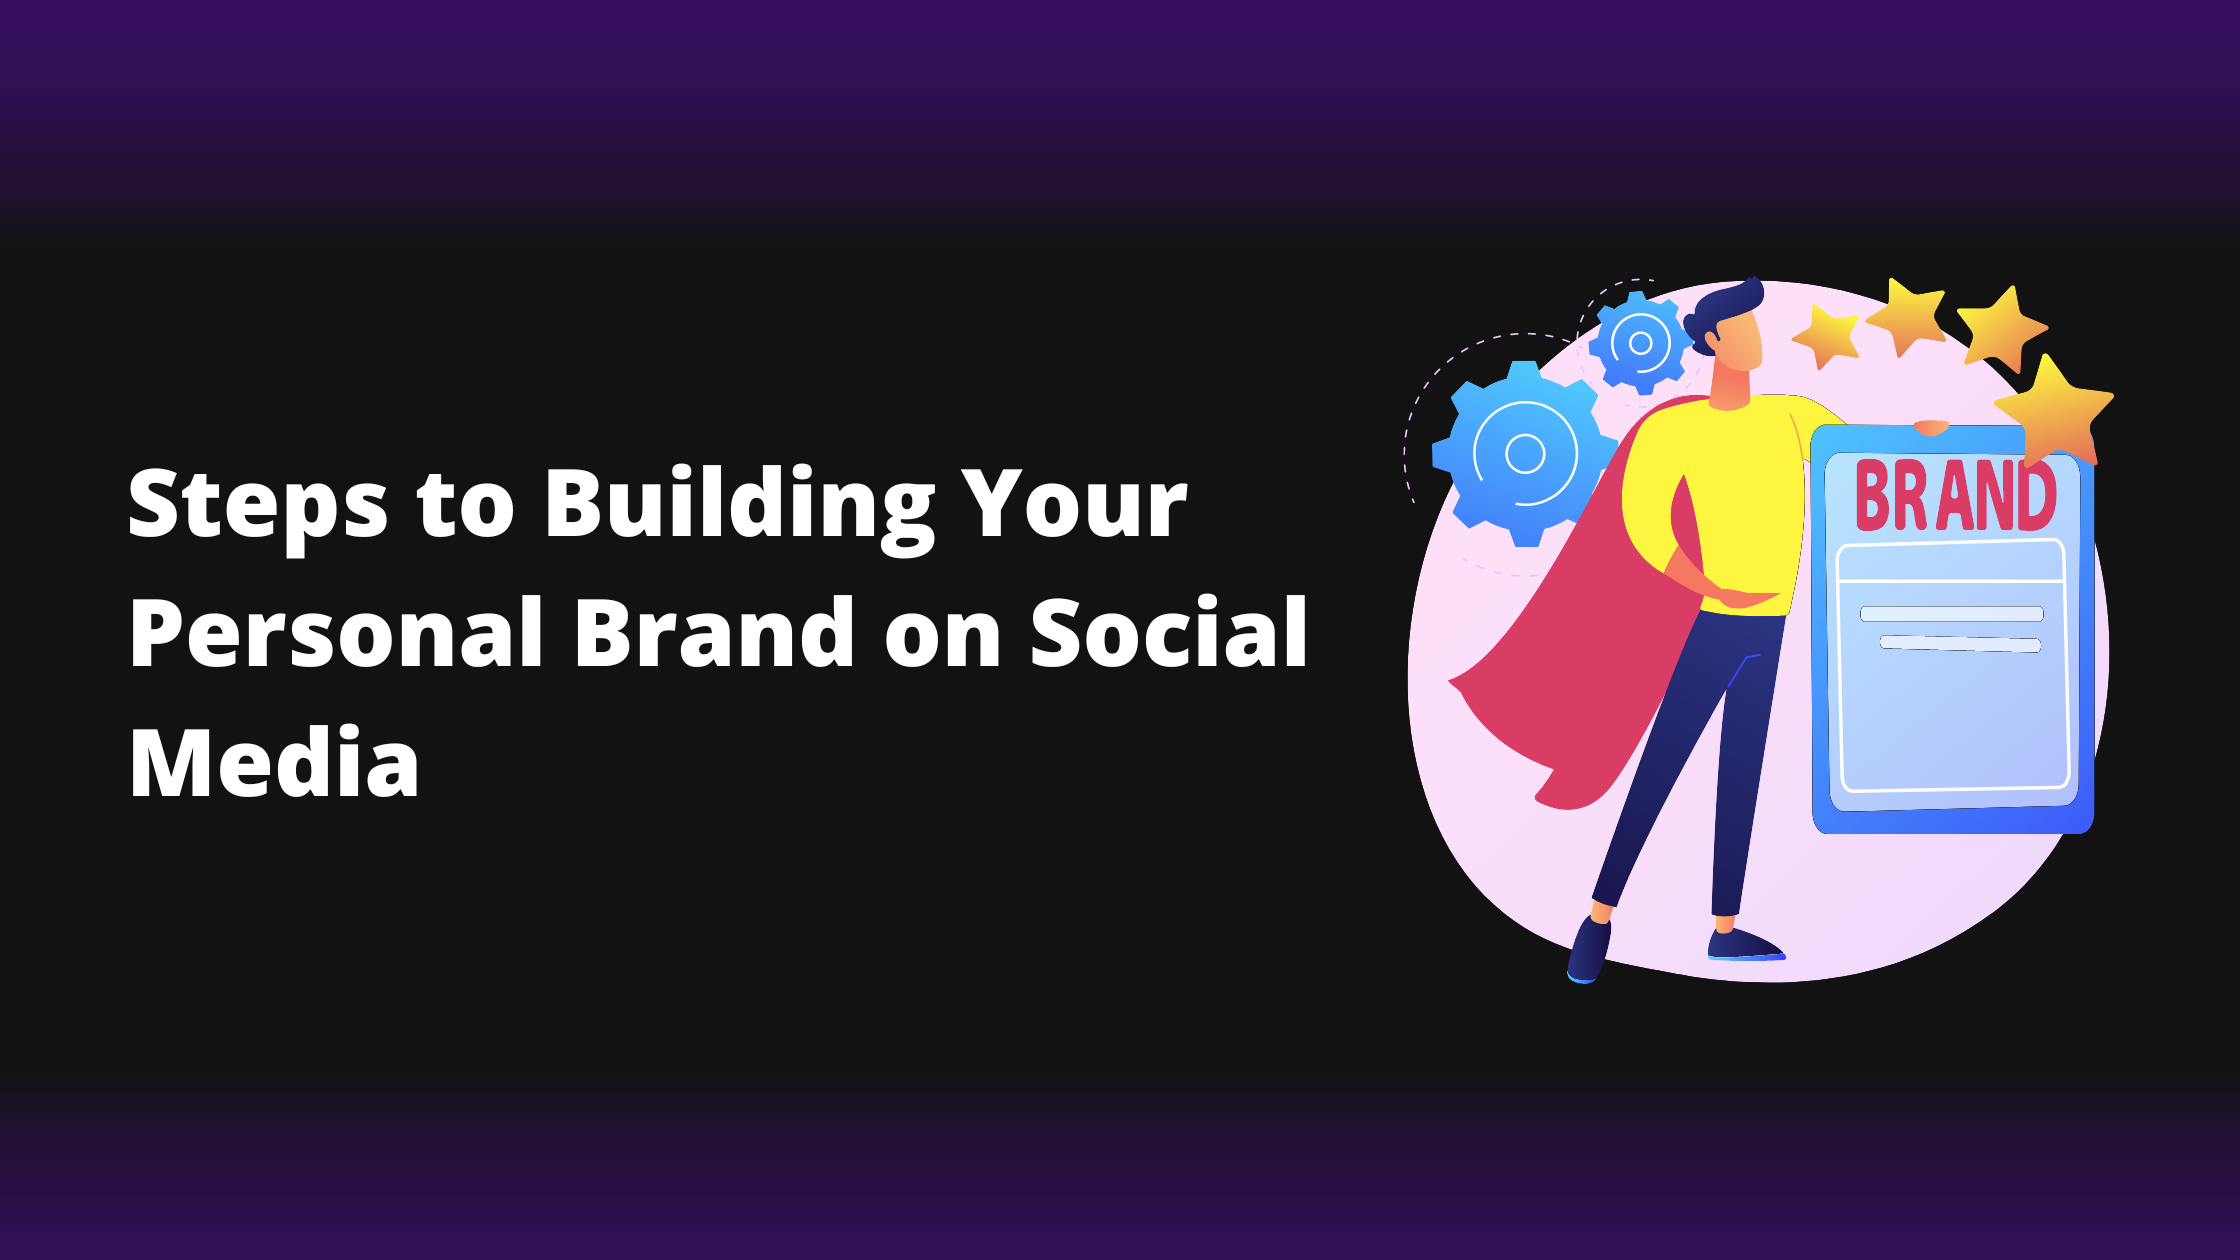 Steps to Building Your Personal Brand on Social Media